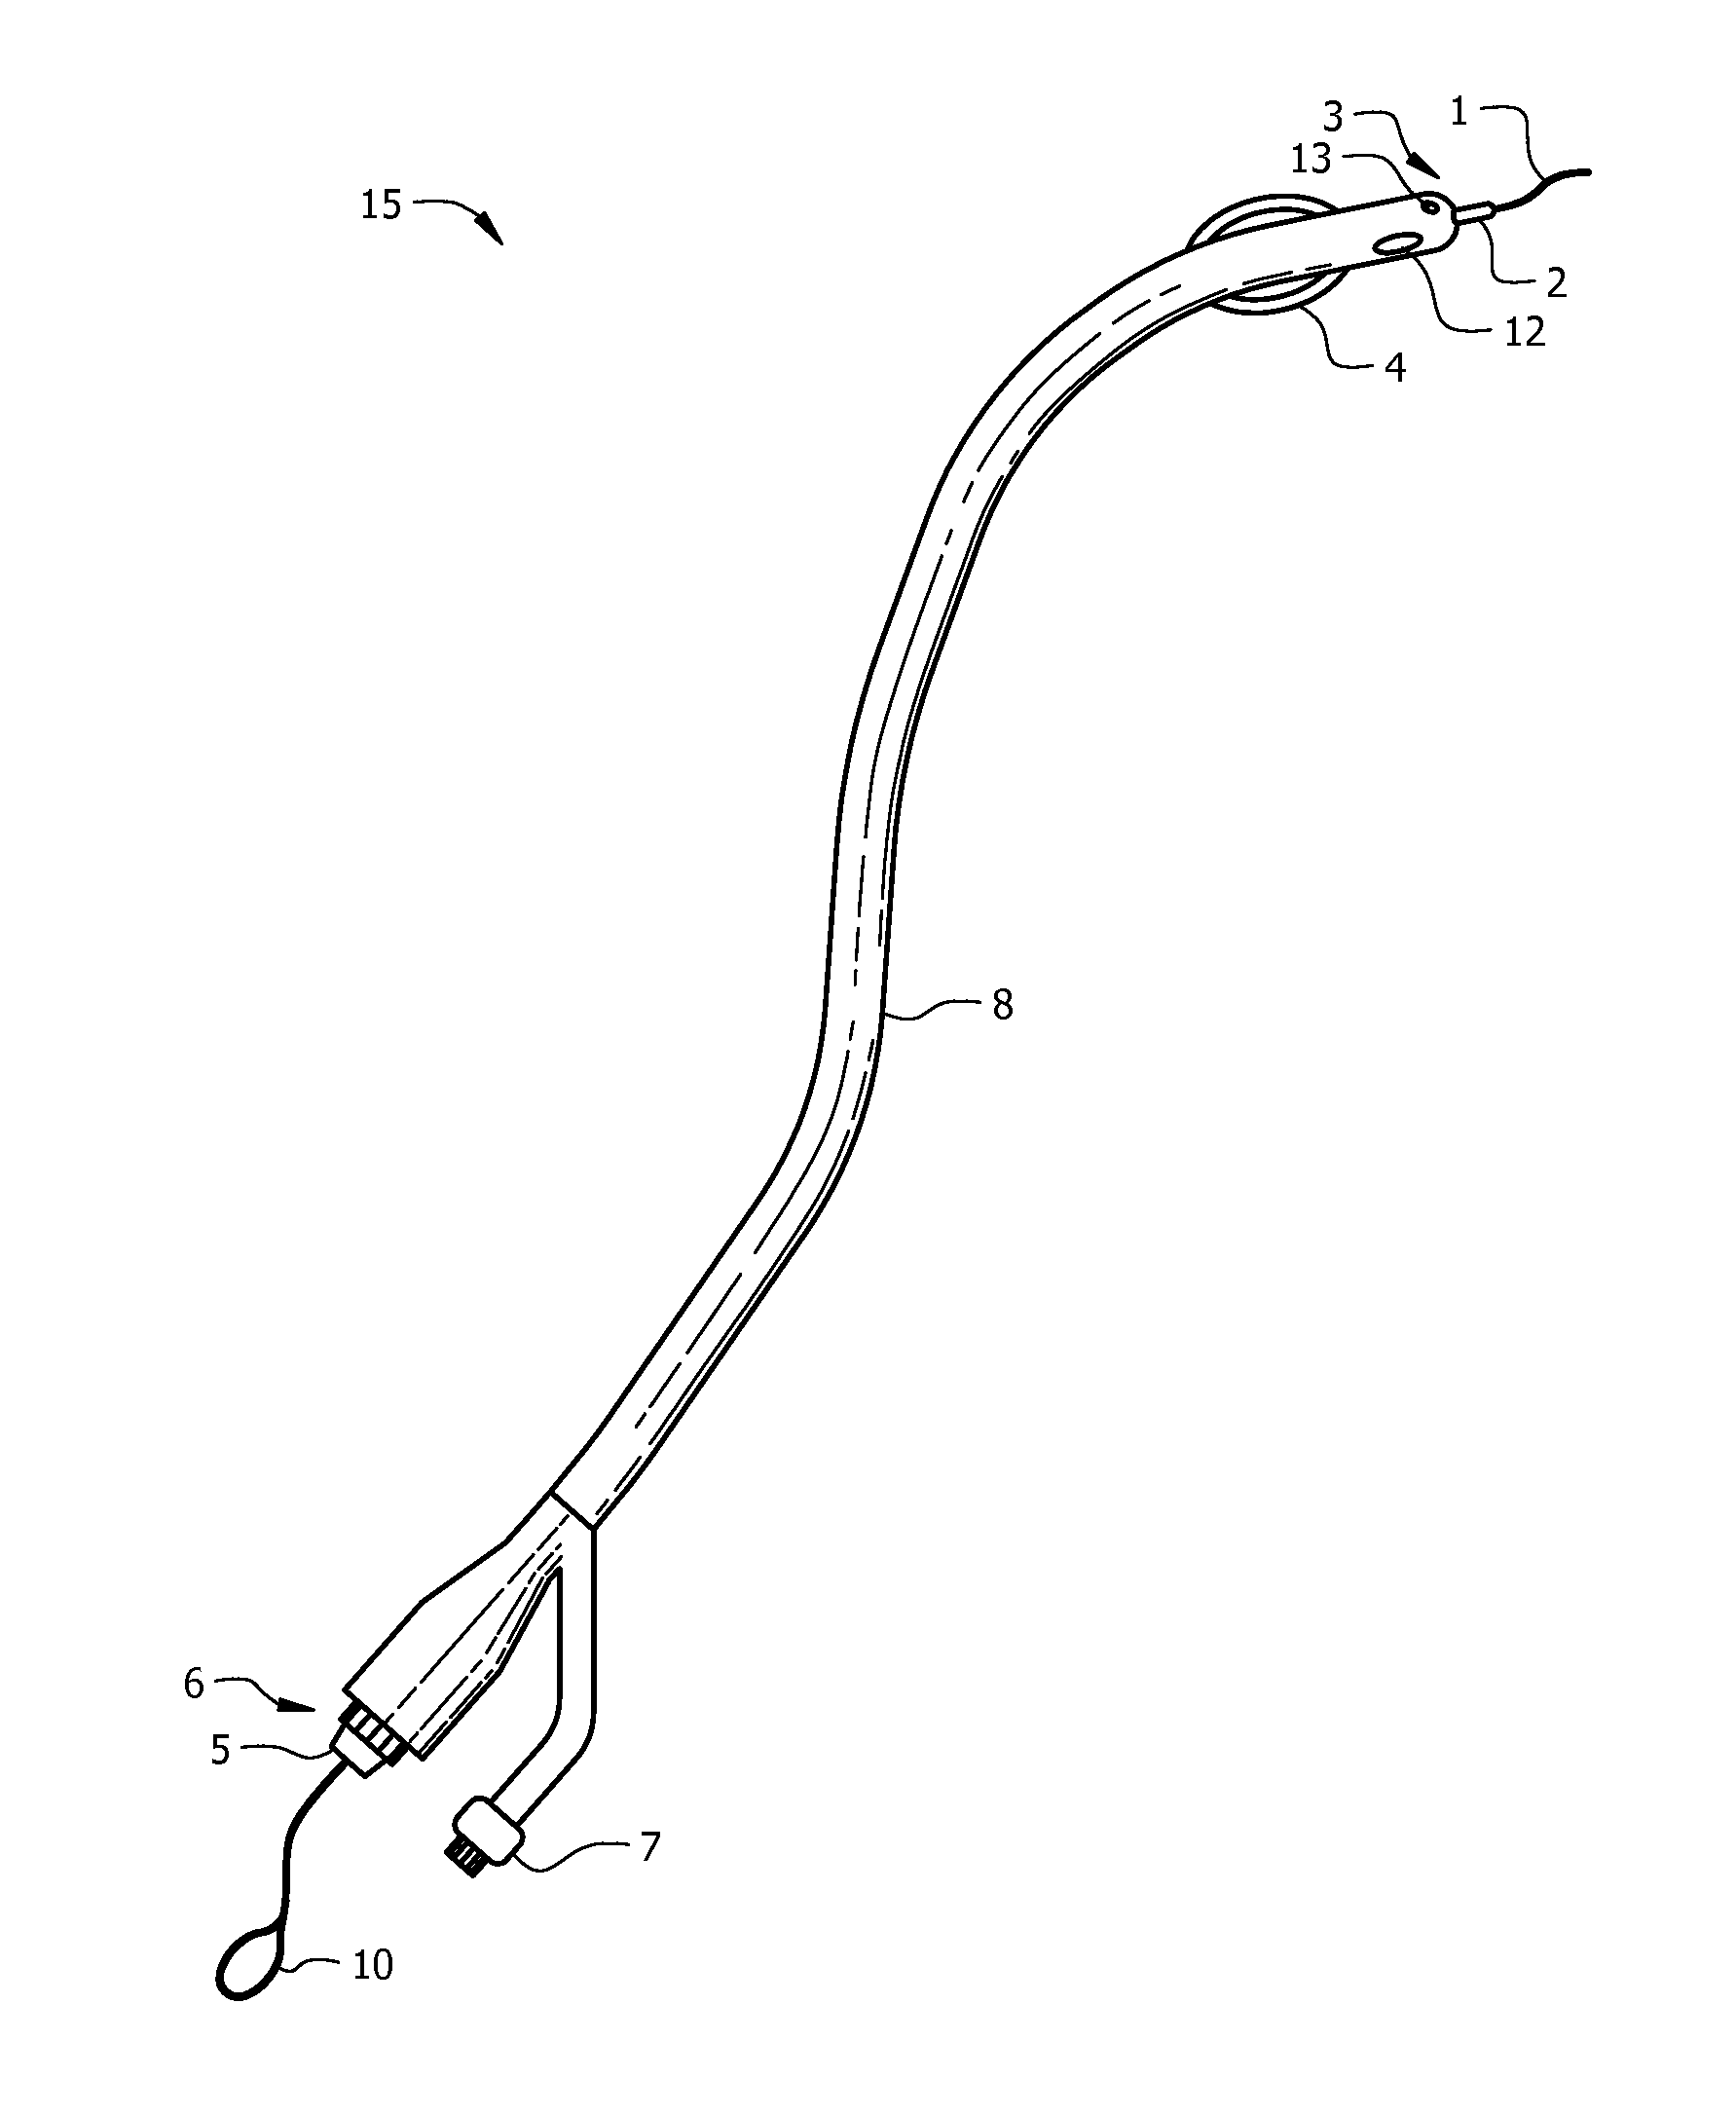 Urethral catheter assembly with a guide wire